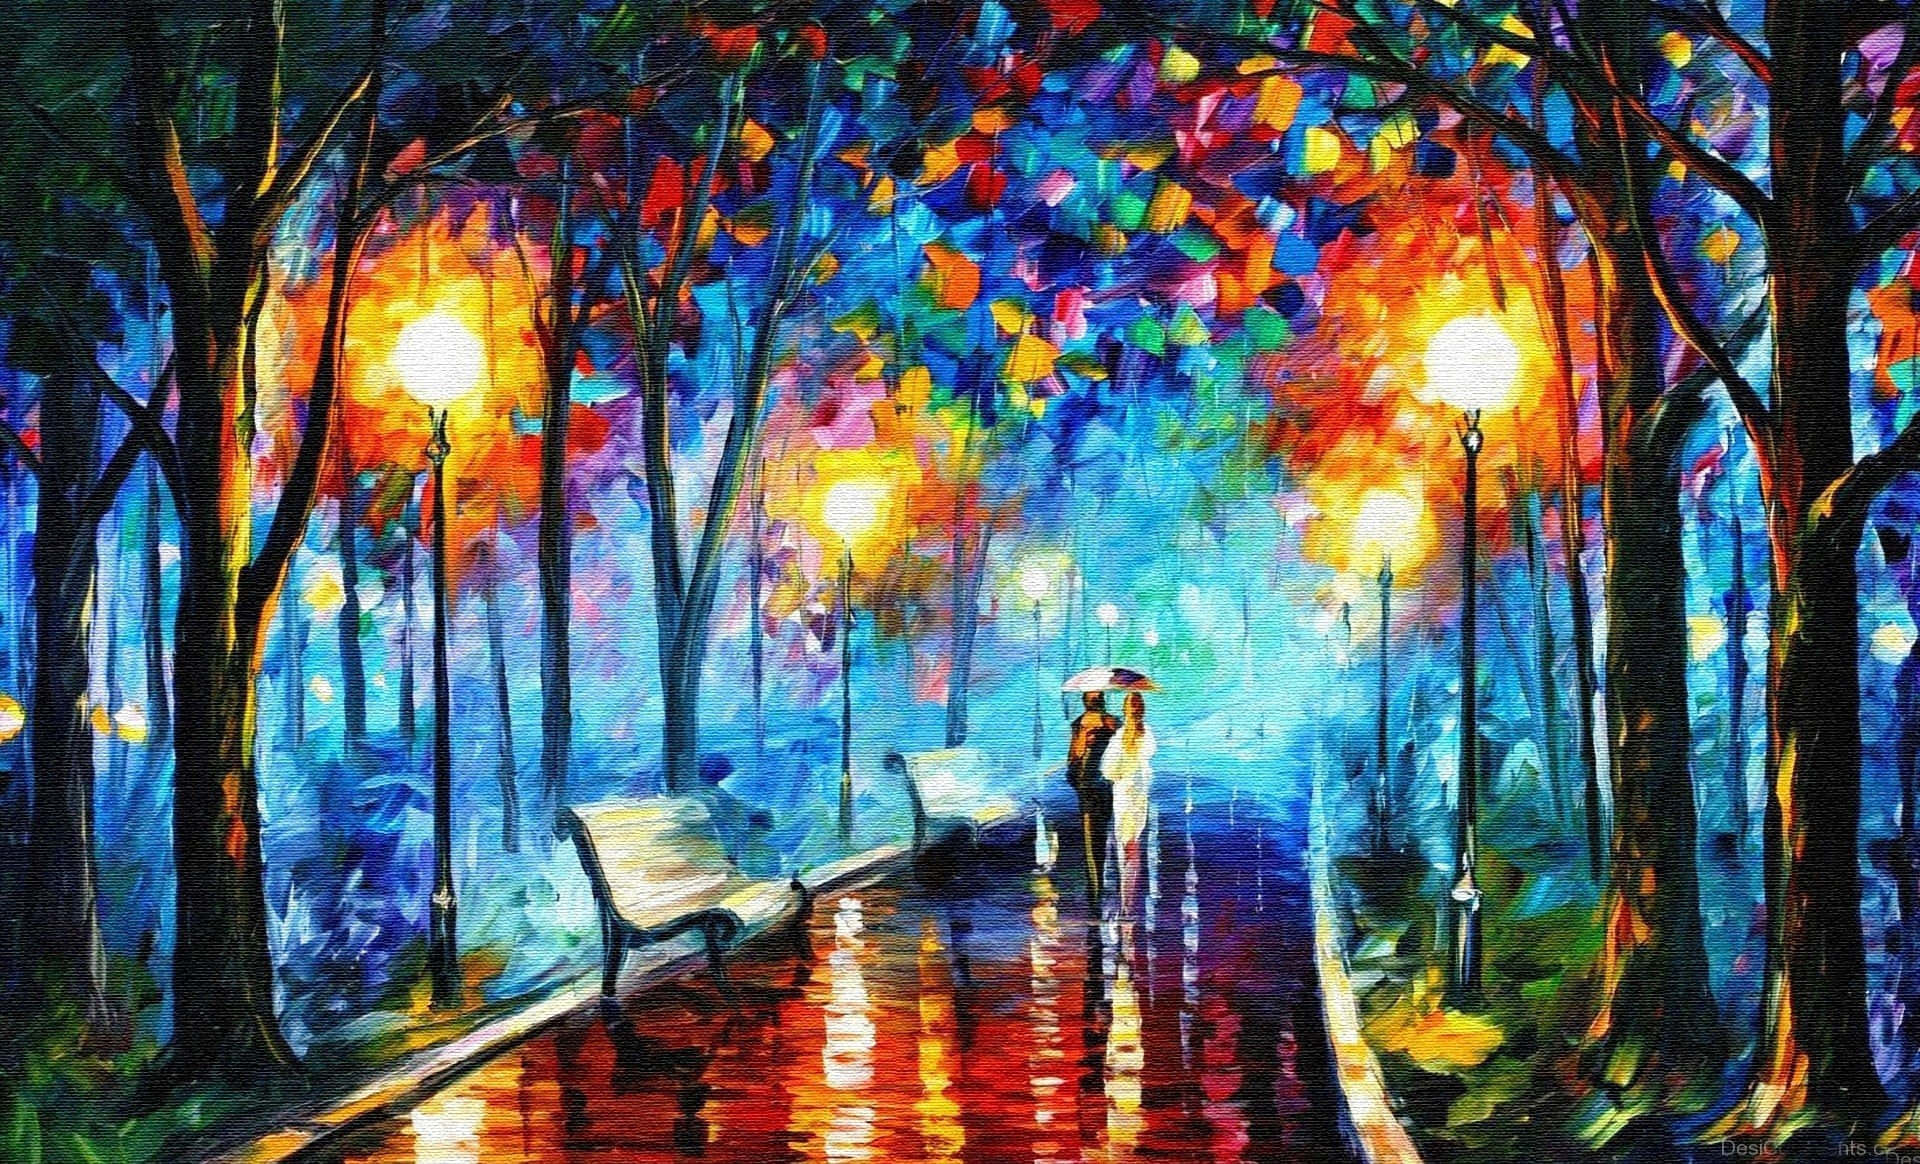 A Painting Of A Couple Walking In The Park